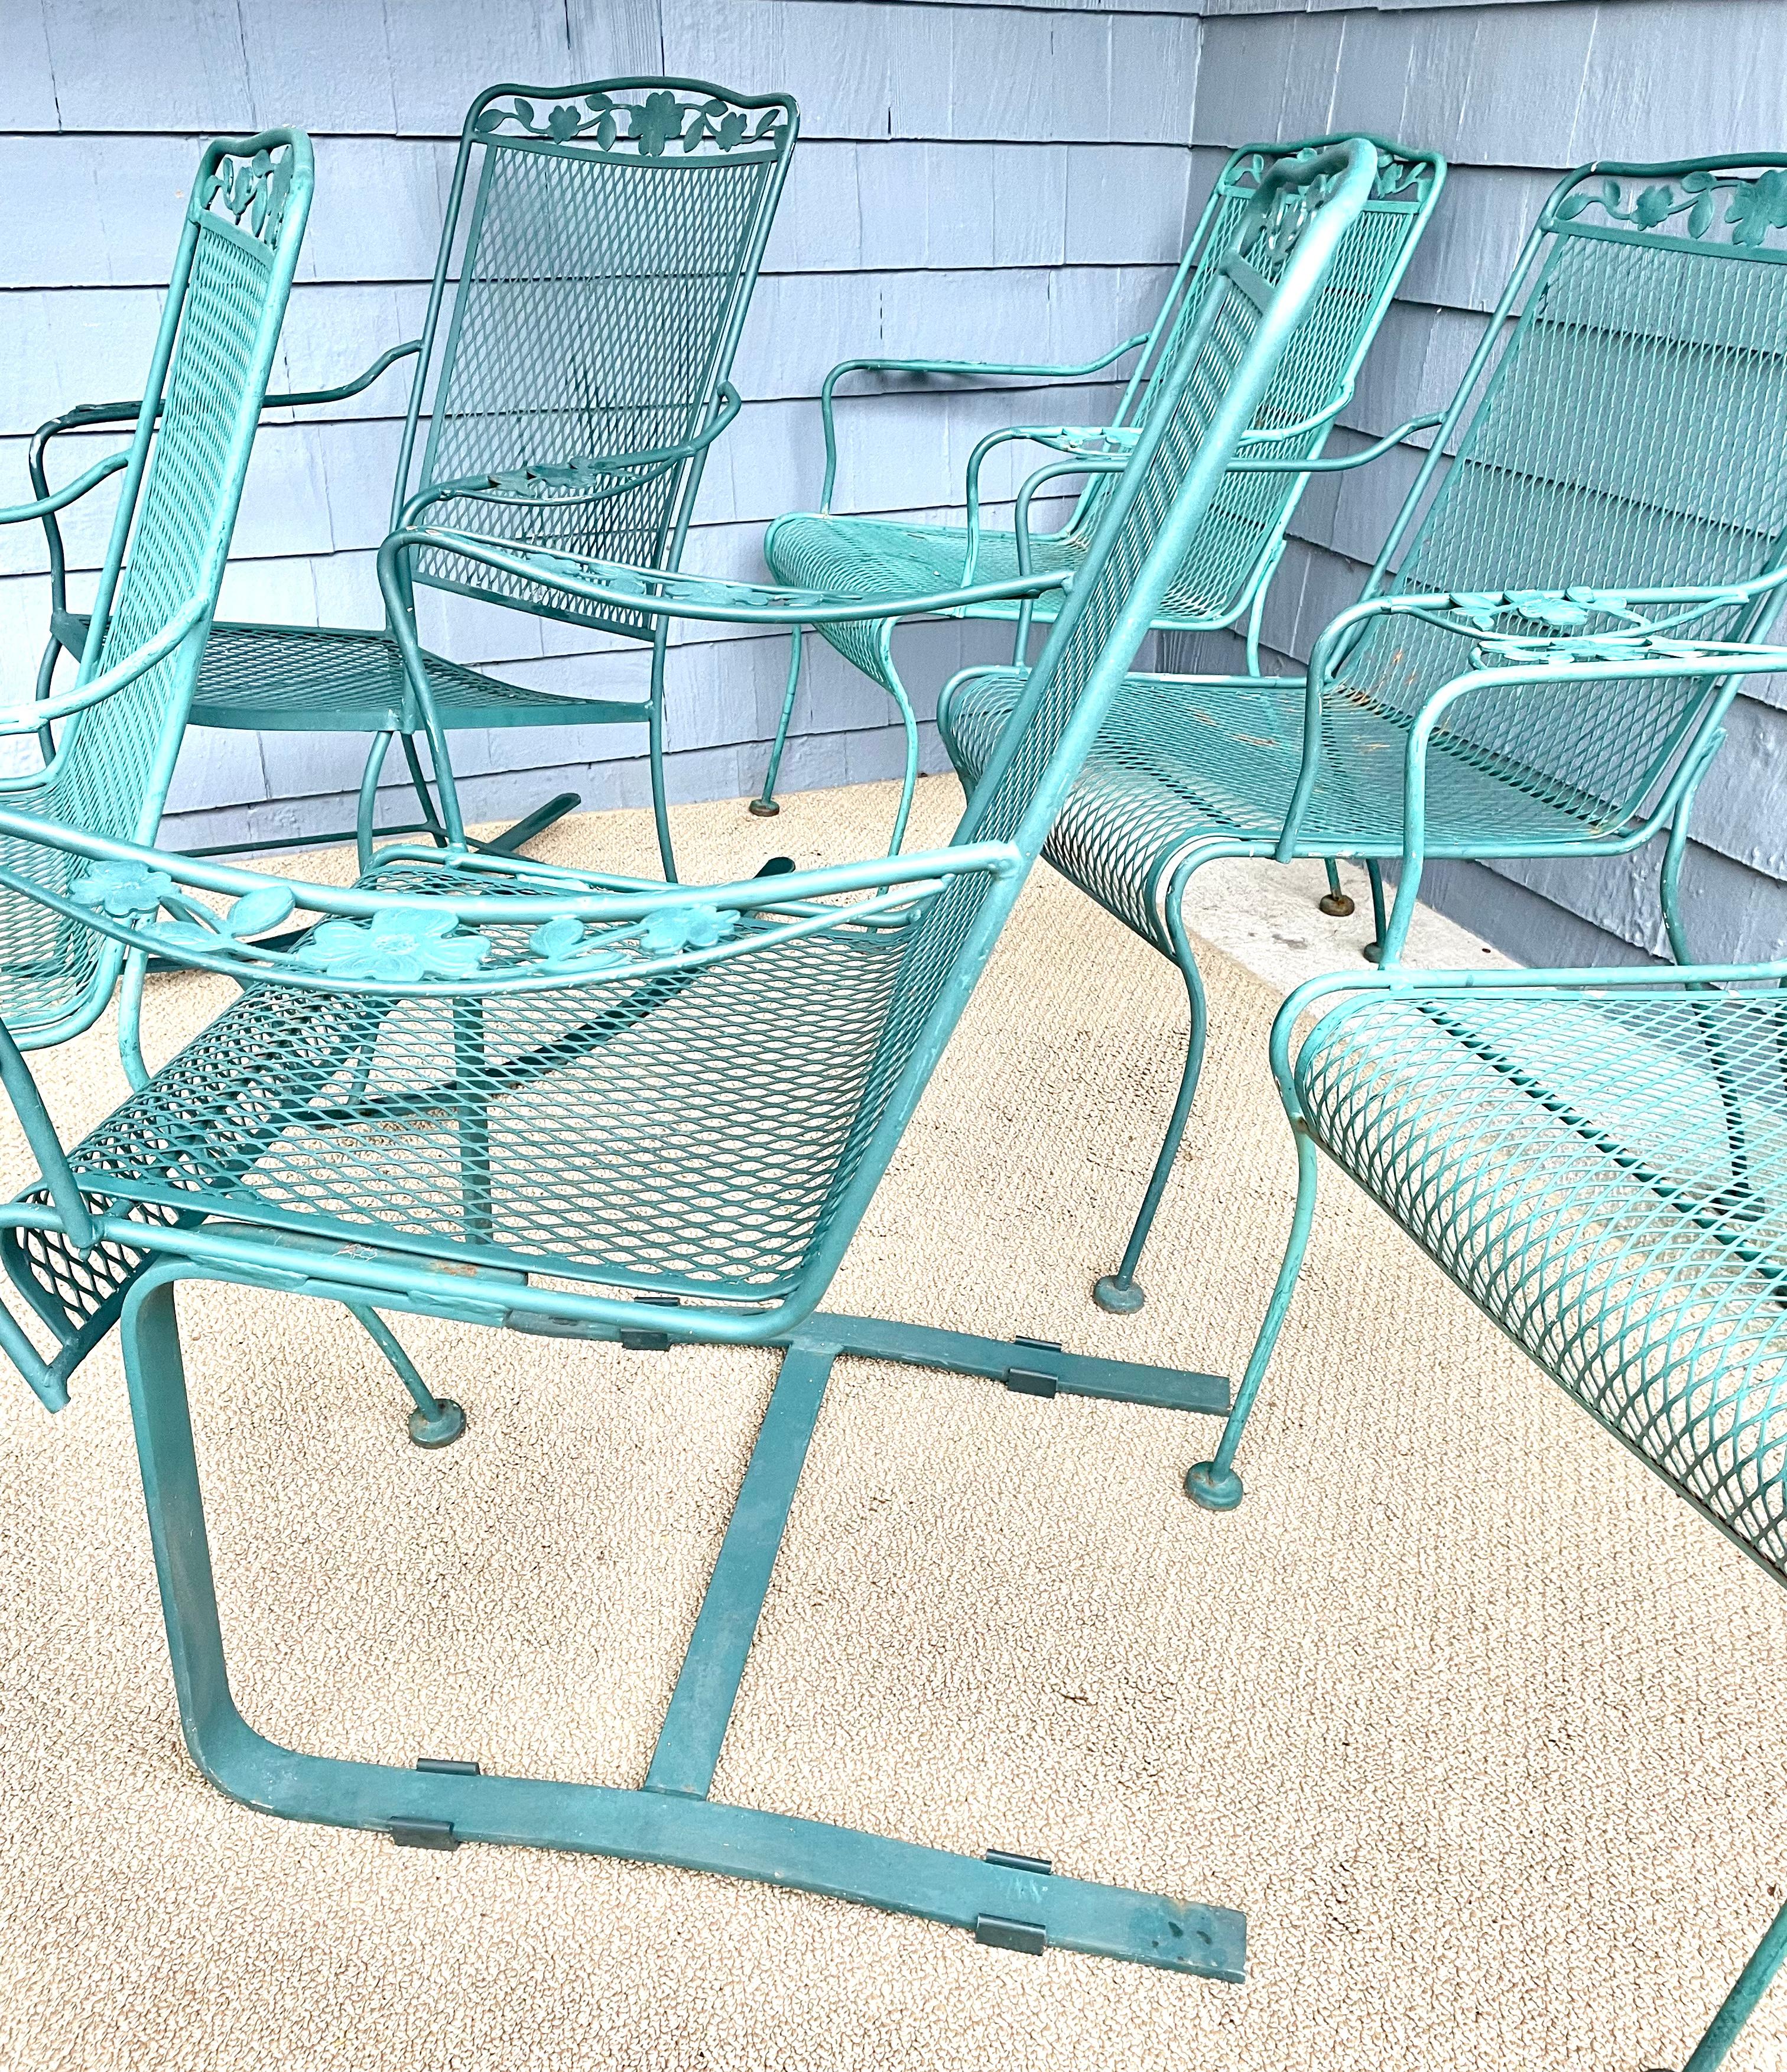 antique metal lawn chairs